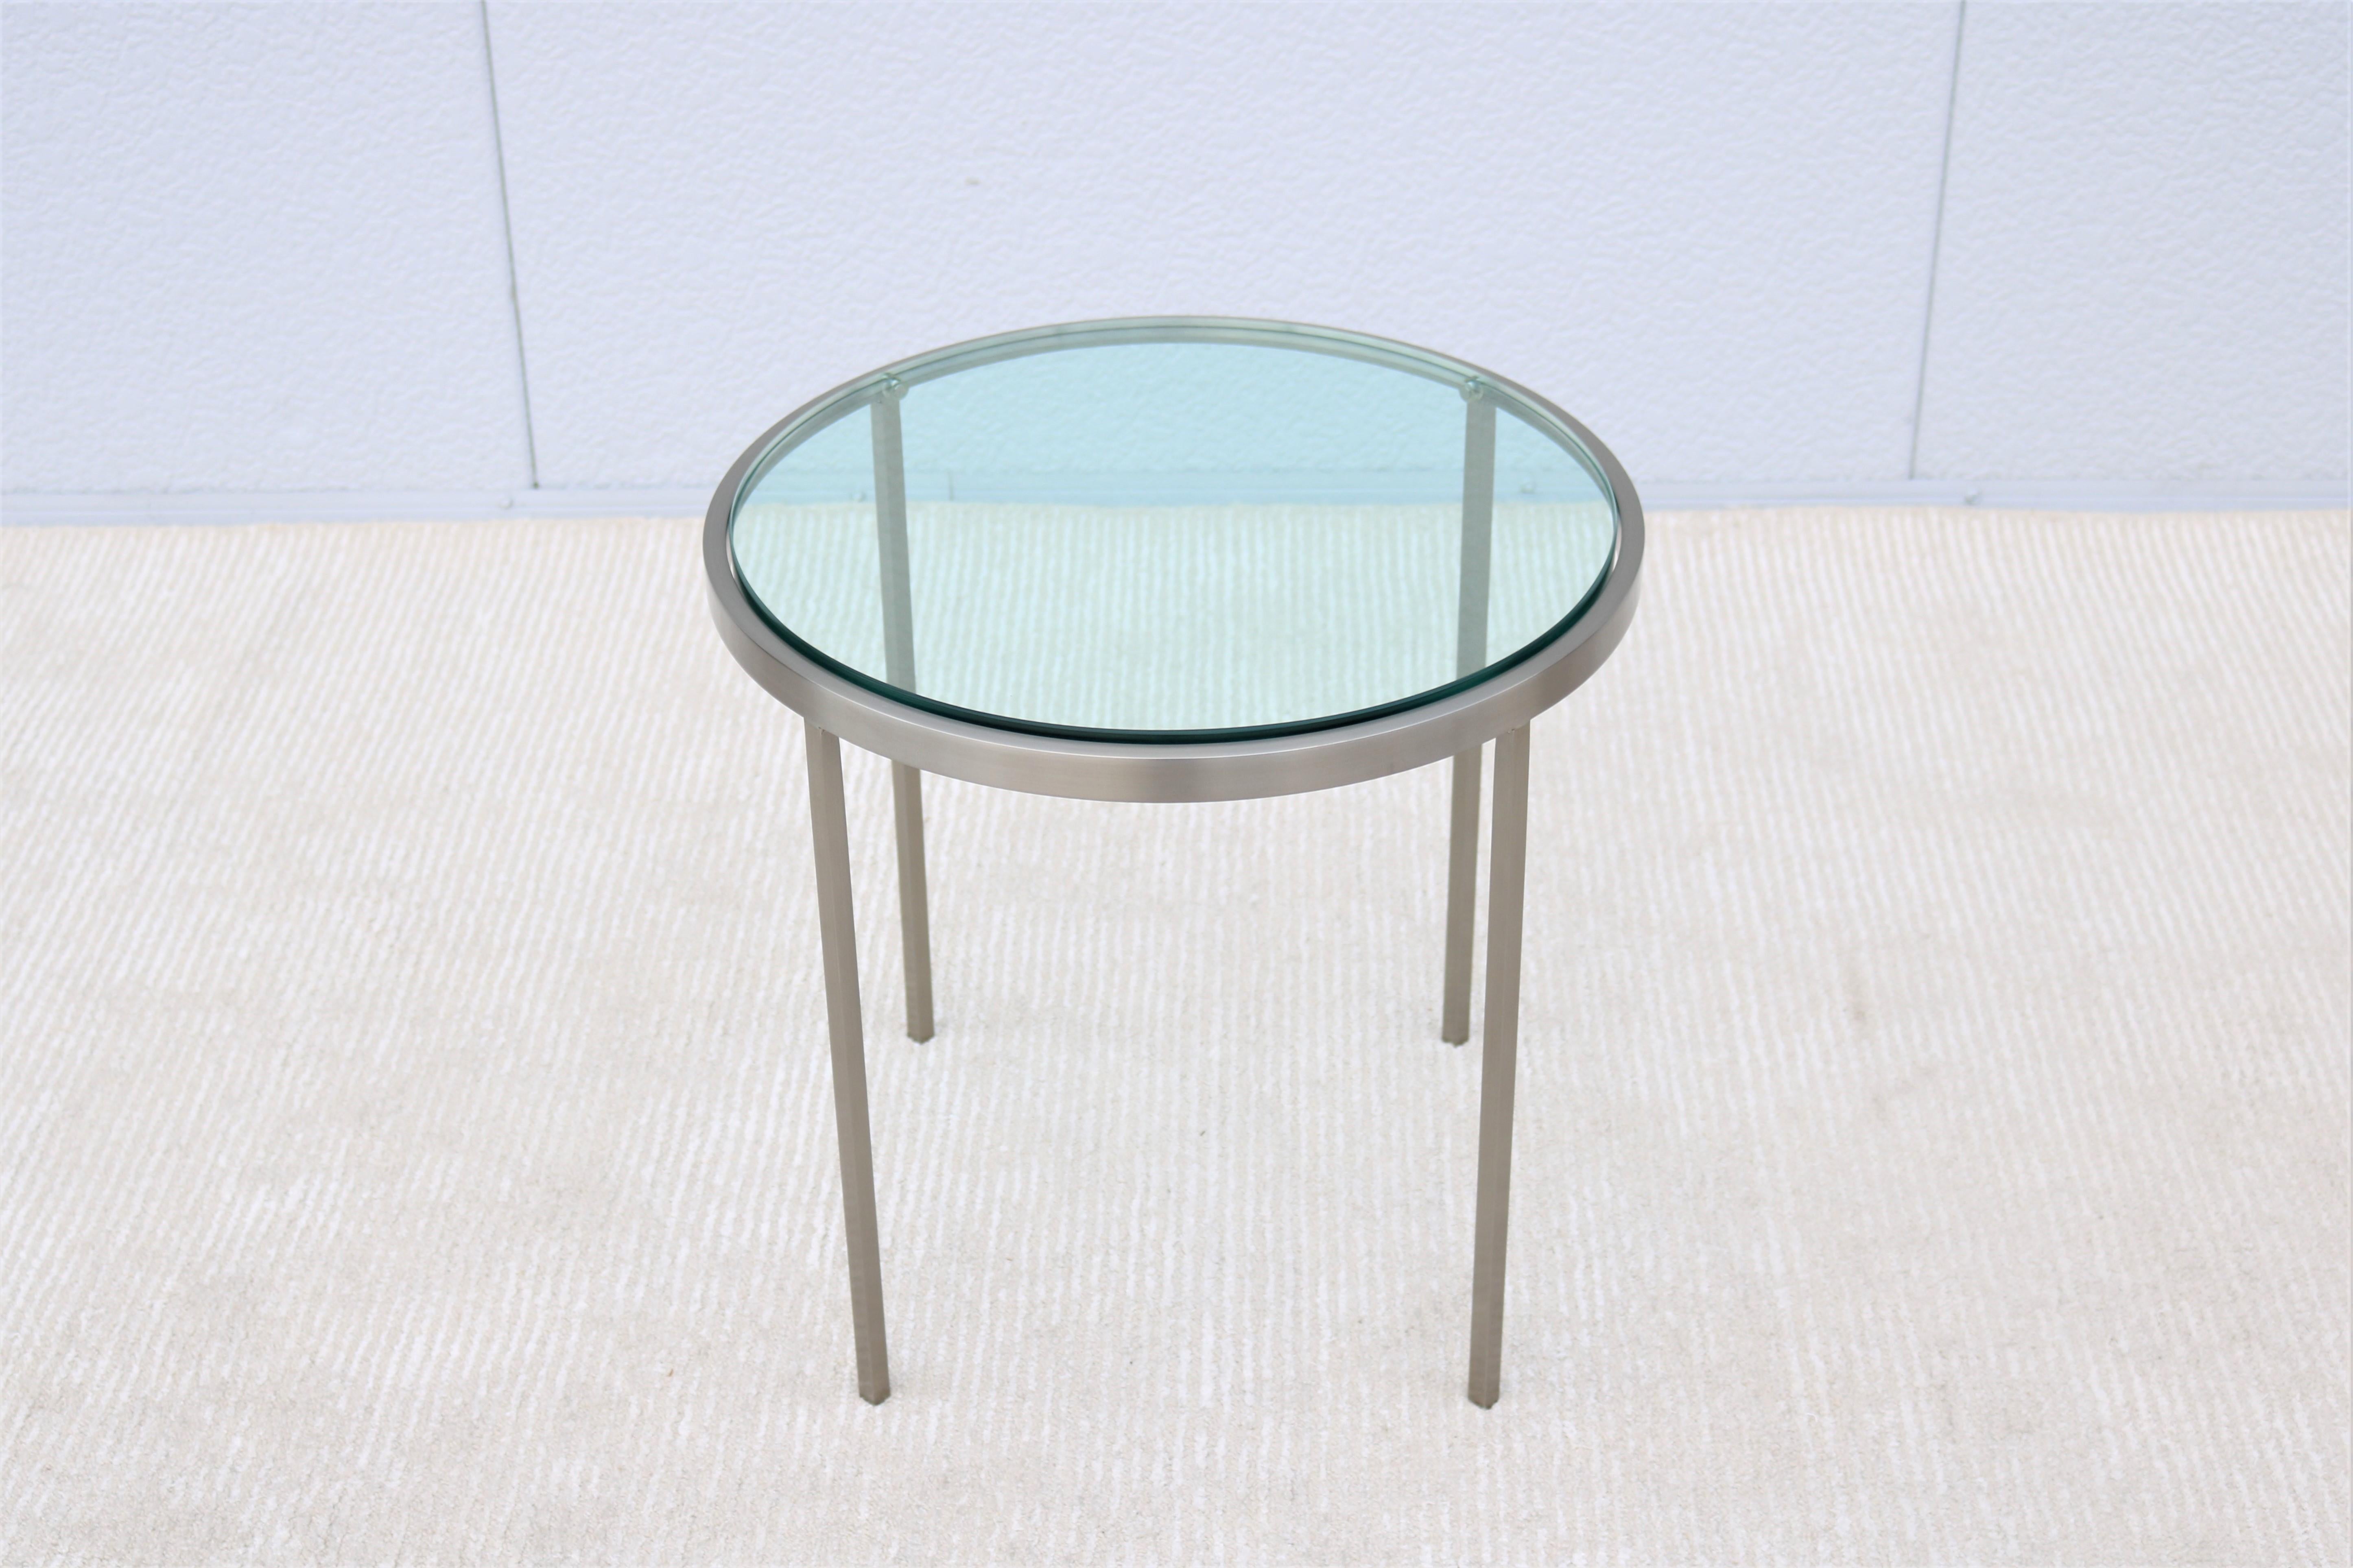 A stunning minimalist and elegant looking Mid-Century Modern Milo Baughman style side end table.
Features a circular stainless-steel frame holding an Inset glass top supported by four square tubular legs.
The minimalistic design with simple clean